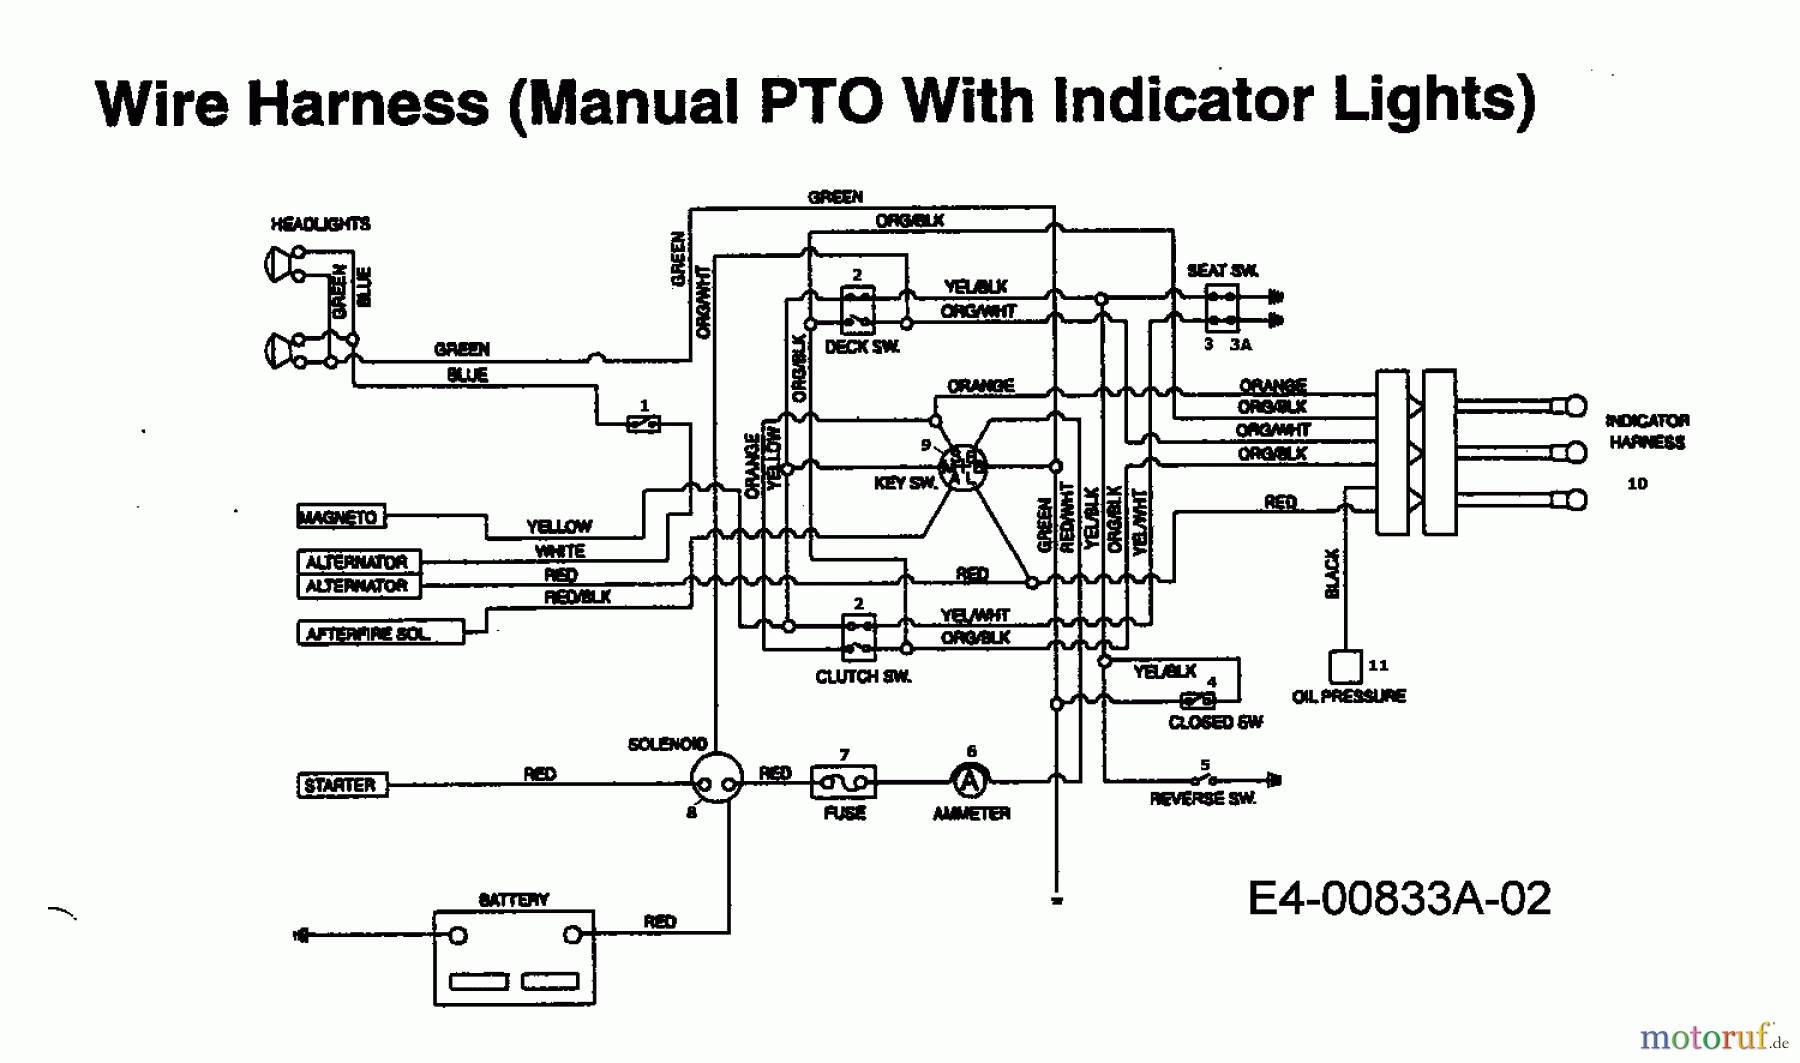  MTD Lawn tractors EH 155 13AD795N678  (1997) Wiring diagram with indicator lights